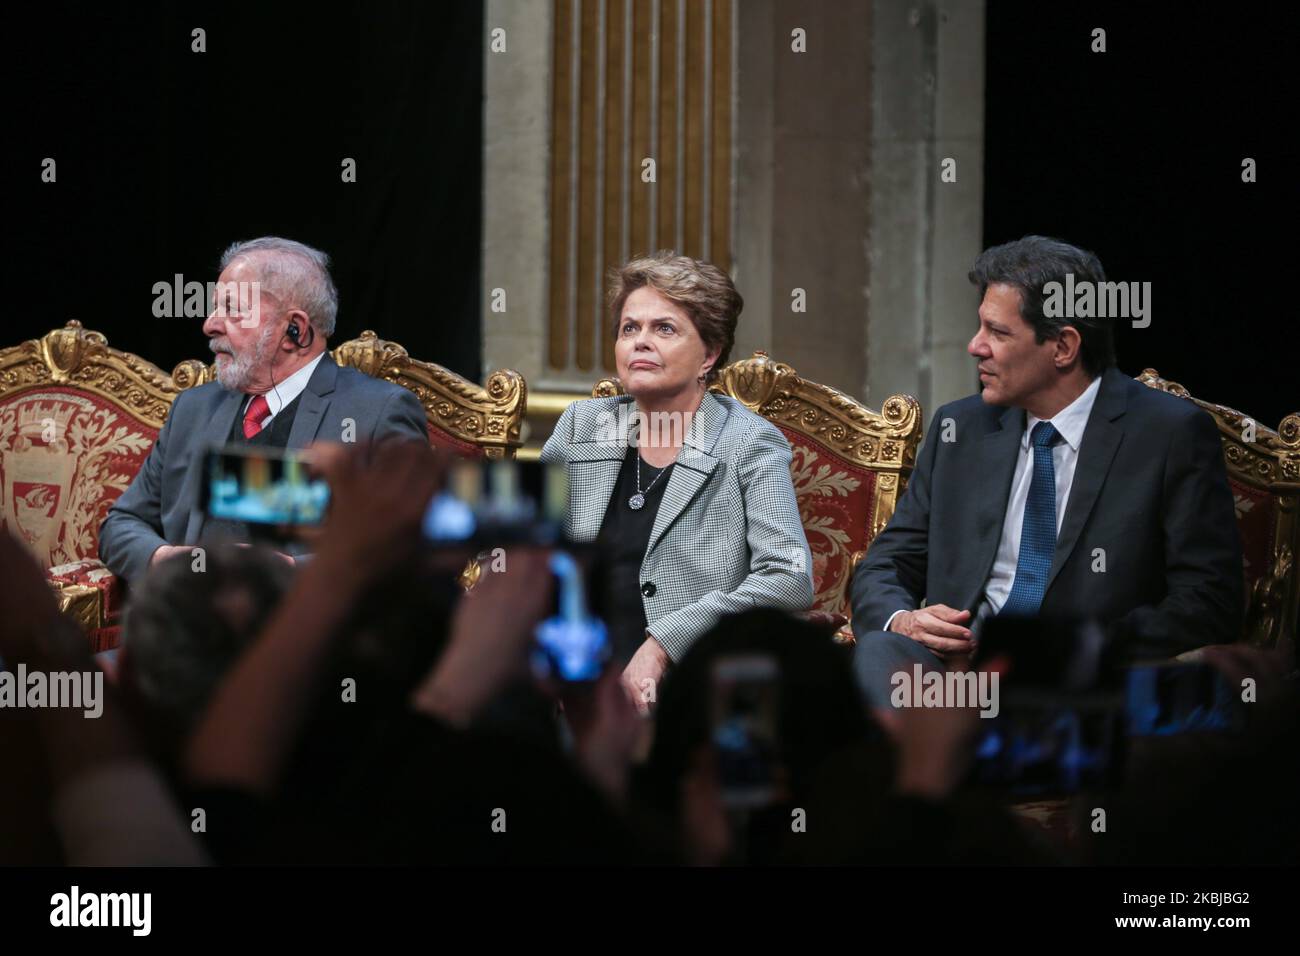 (Lto R) Former Brazilian president Luiz Inacio Lula da Silva, Former Brazilian president Dilma Rousseff and former Sao Paolo Mayor Fernando Hadda take part in a ceremony at the City Hall of Paris, on March 2, 2020, during wich the President Lula da Silva was named honorary citizen of the city of Paris. (Photo by Michel Stoupak/NurPhoto) Stock Photo